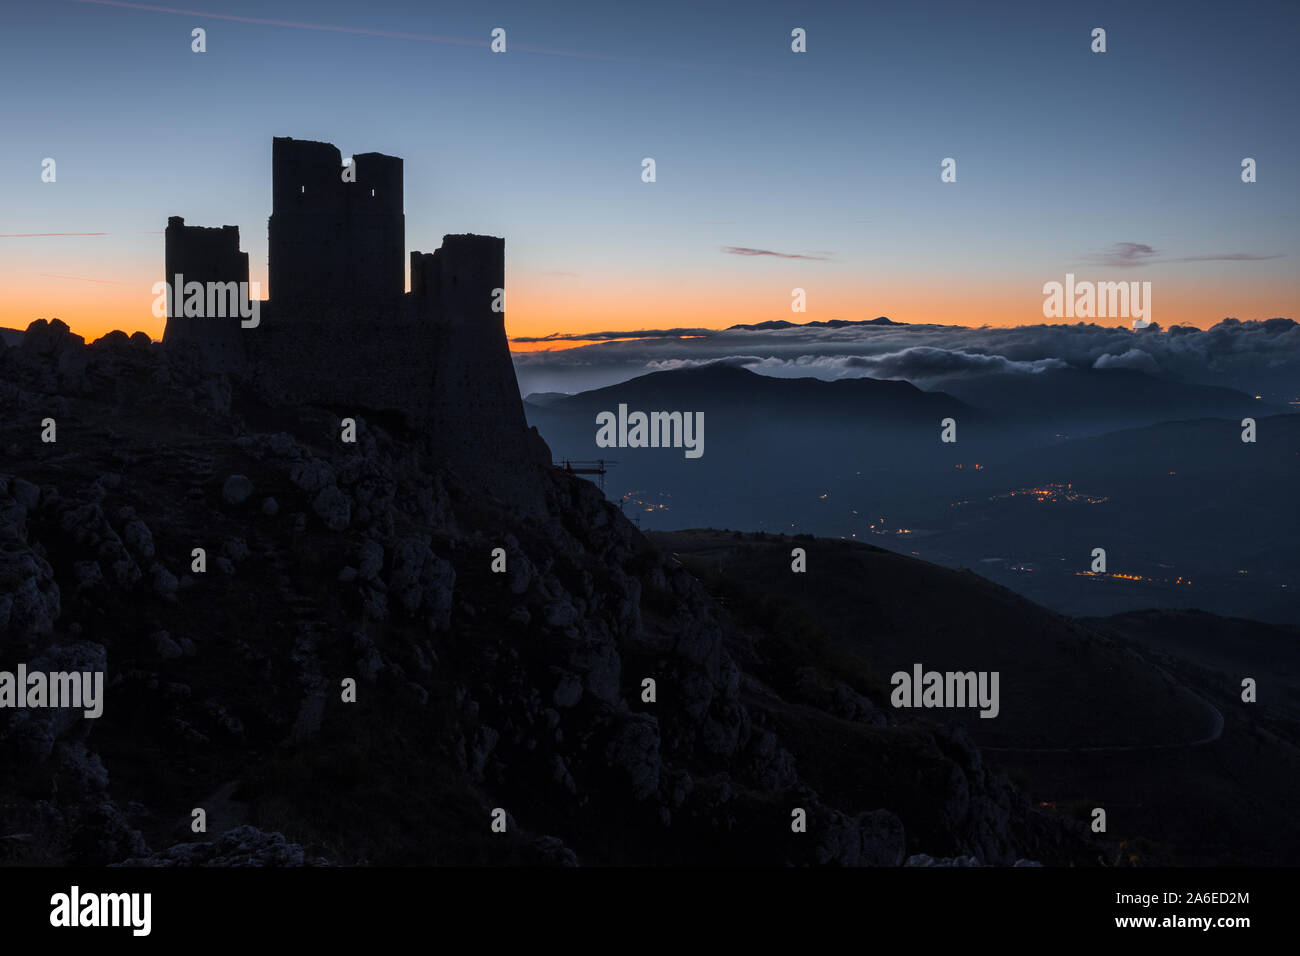 Silhouette of Ruins of medieval castle of Rocca Calascio at sunrise, with foggy mountain landscape in background , Abruzzo, Italy Stock Photo